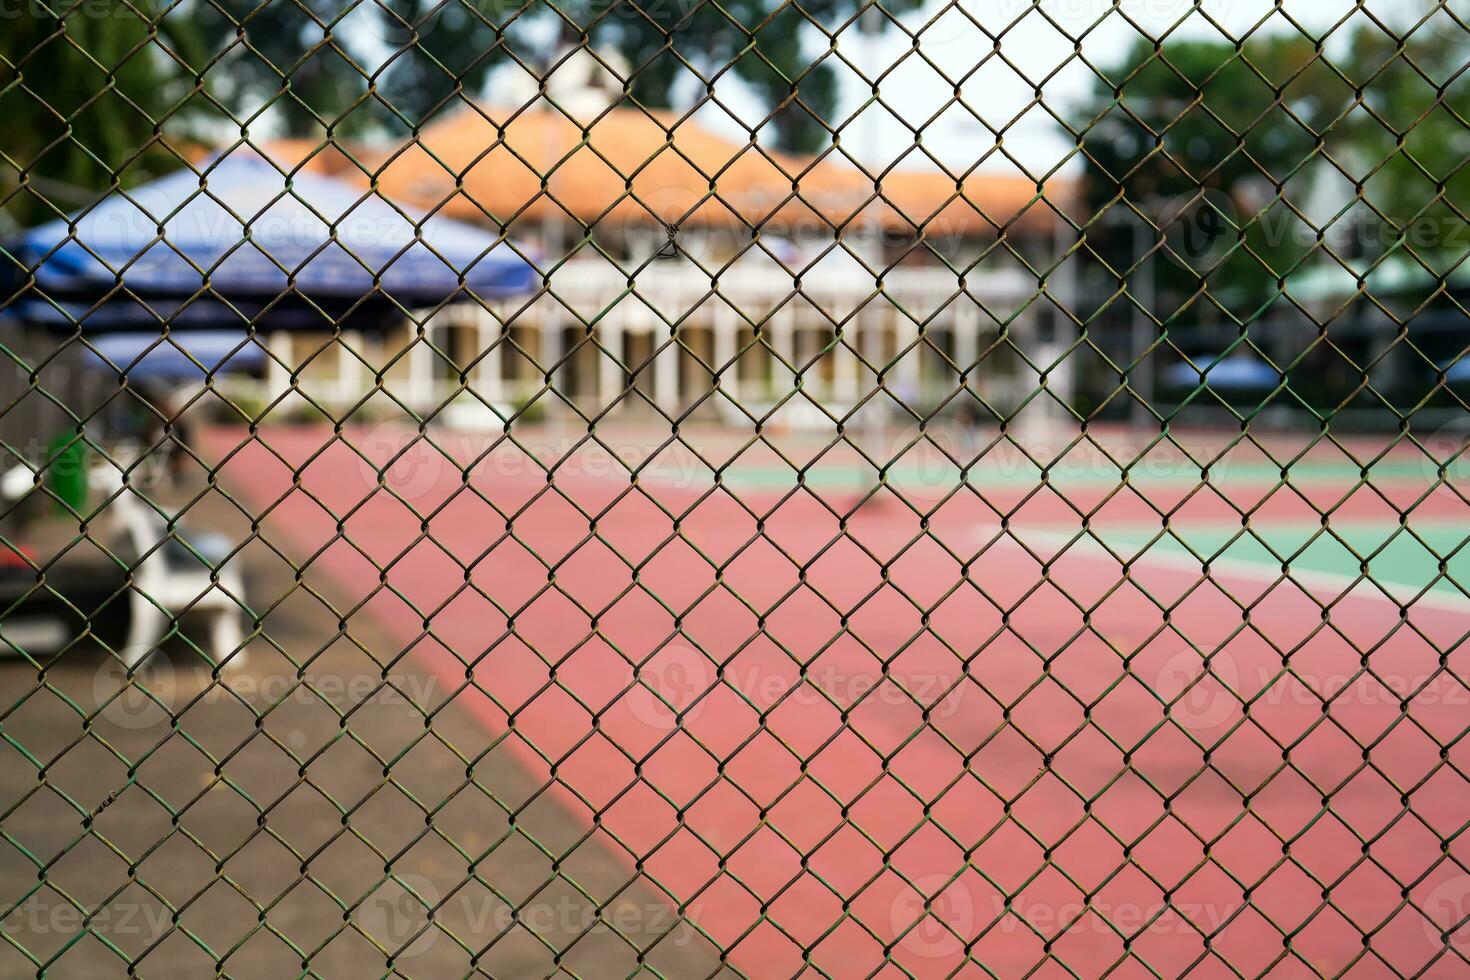 Metal mesh on a blurred background of a tennis court with players. photo